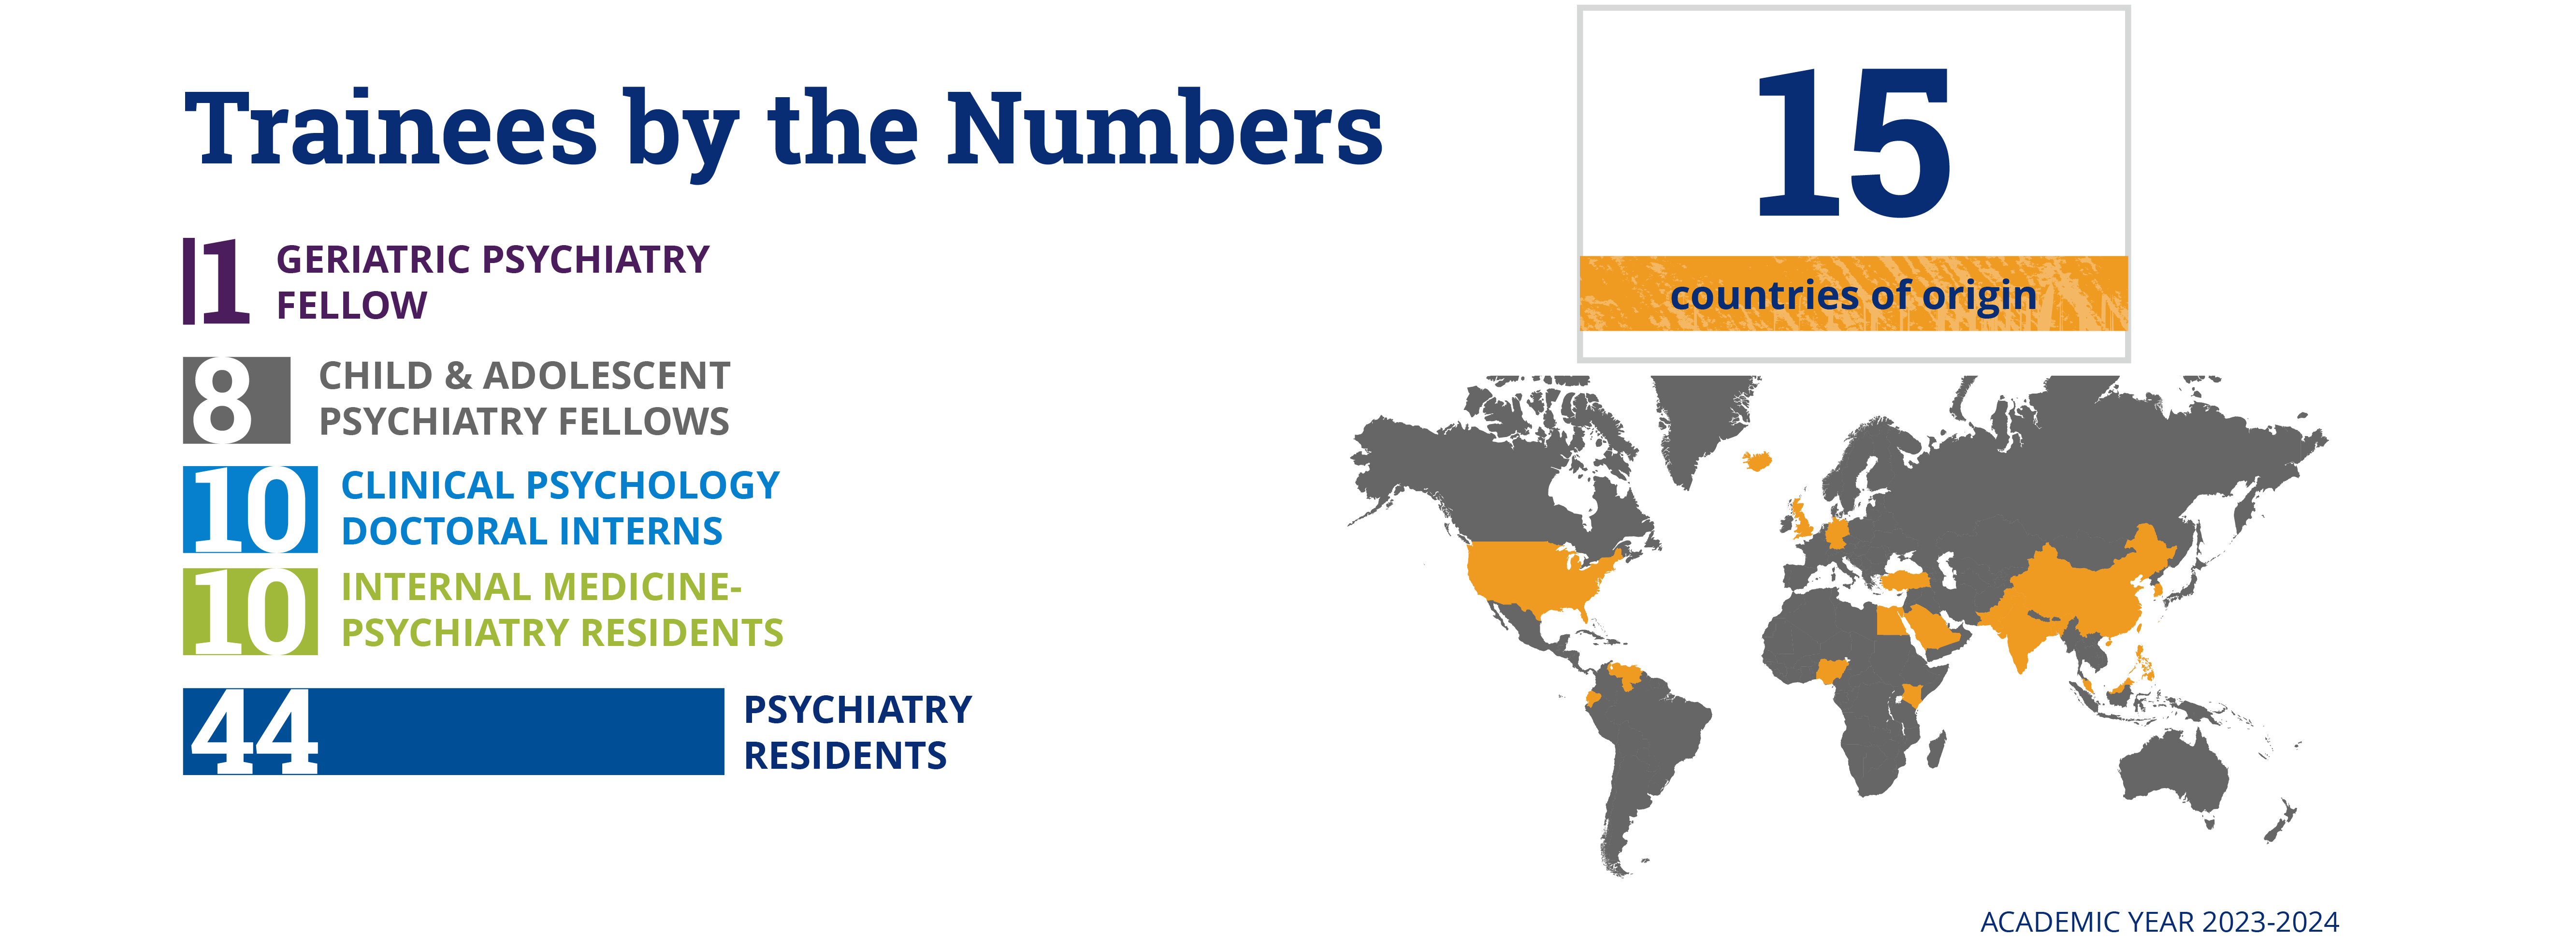 Infographic: Trainees by the Numbers: 1 geriatric psychiatry fellow; 8 child & adolescent psychiatry fellows; 10 psychology interns; 10 med-psych residents; 44 psychiatry residents; 15 countries of origin (map)